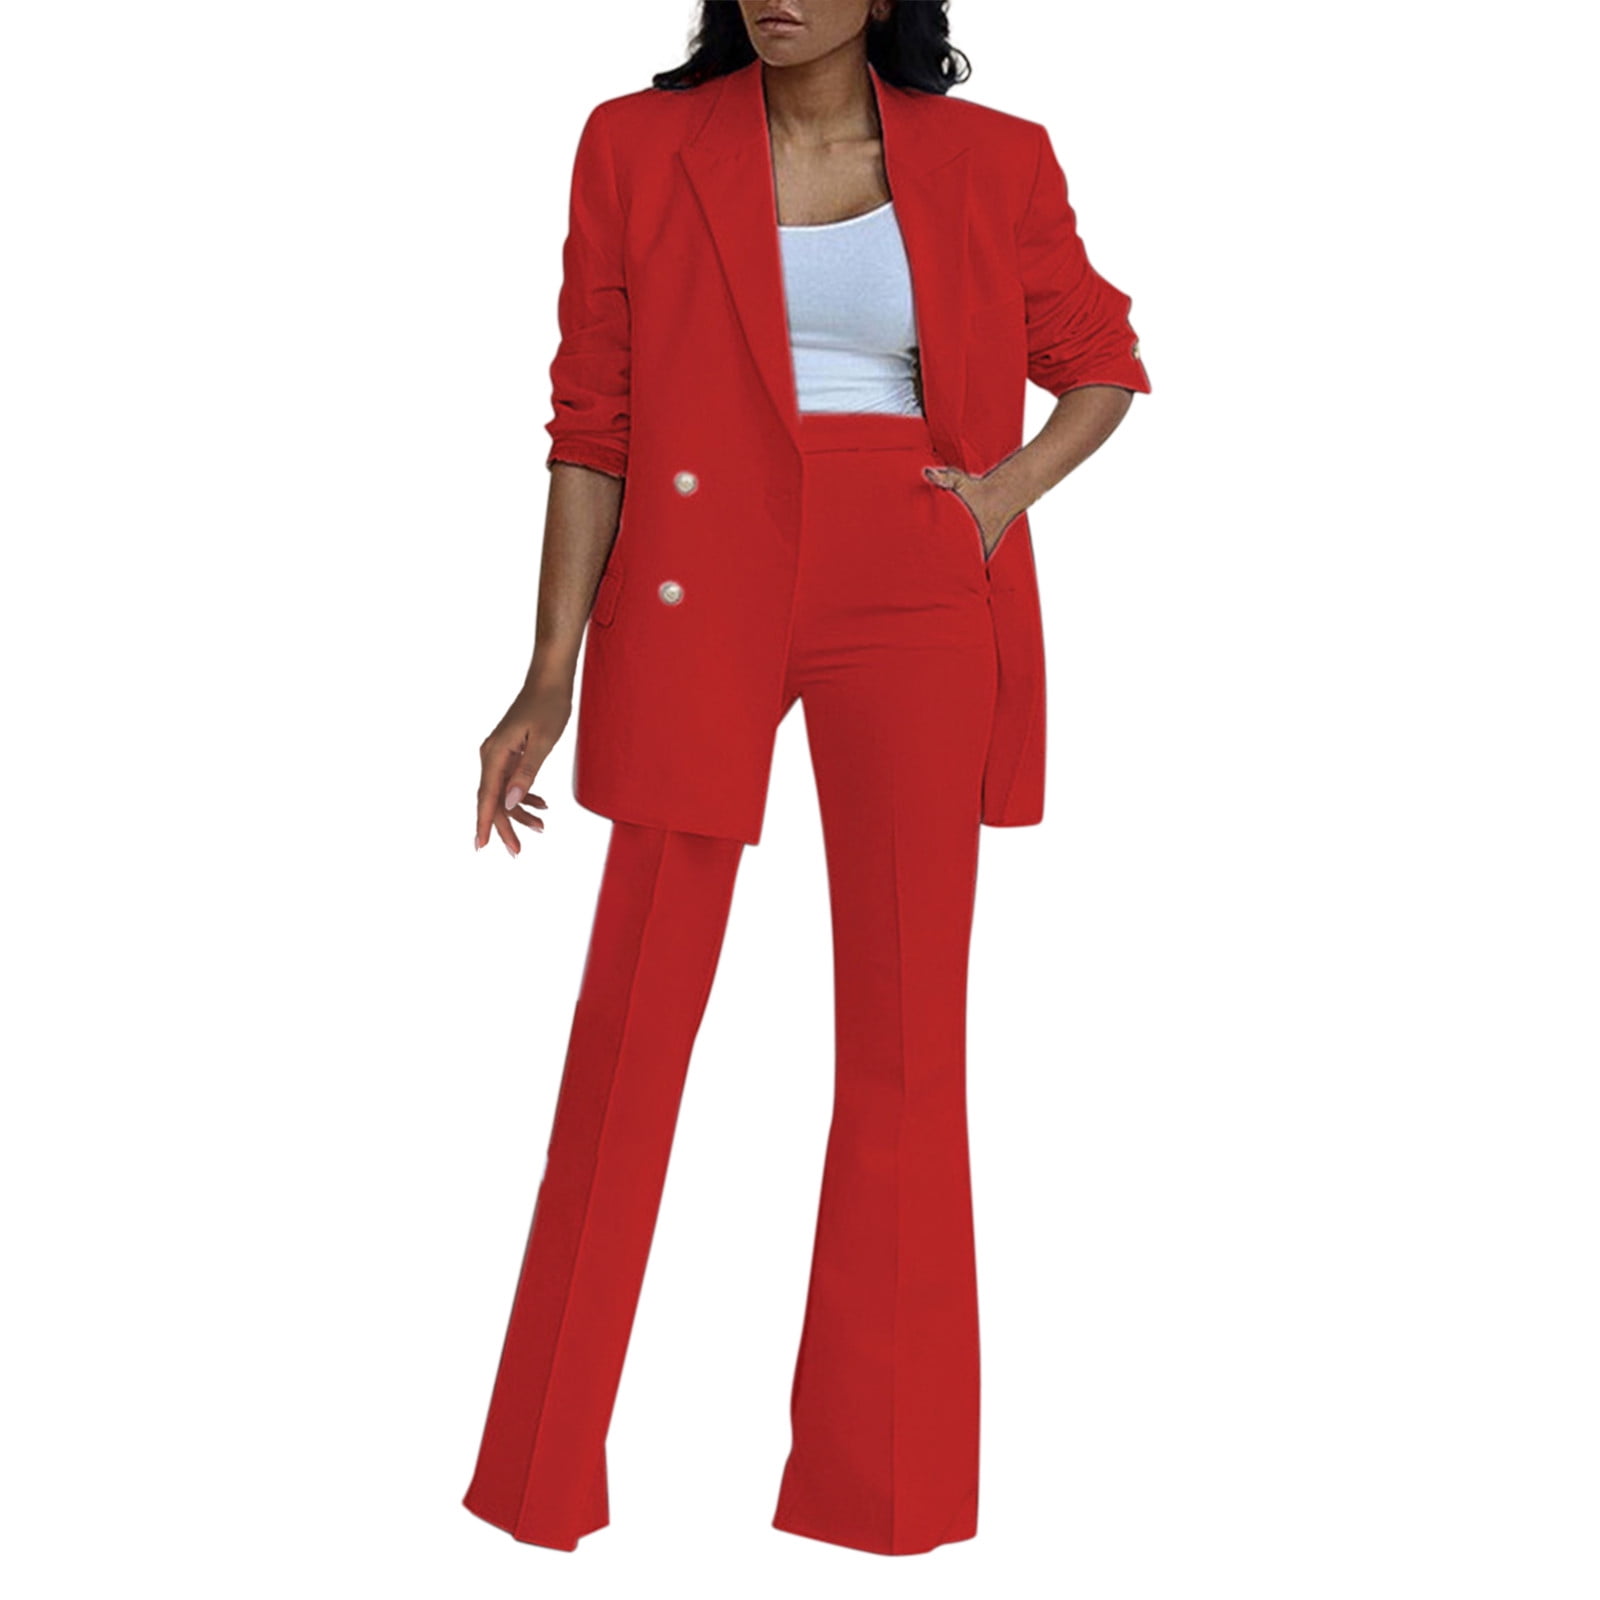 HSMQHJWE Pant Suits For Women Dressy Wedding Guest Life Party Romper Womens  Casual Light Weight Thin Jacket Slim Coat And Trousers Long Sleeve Blazer